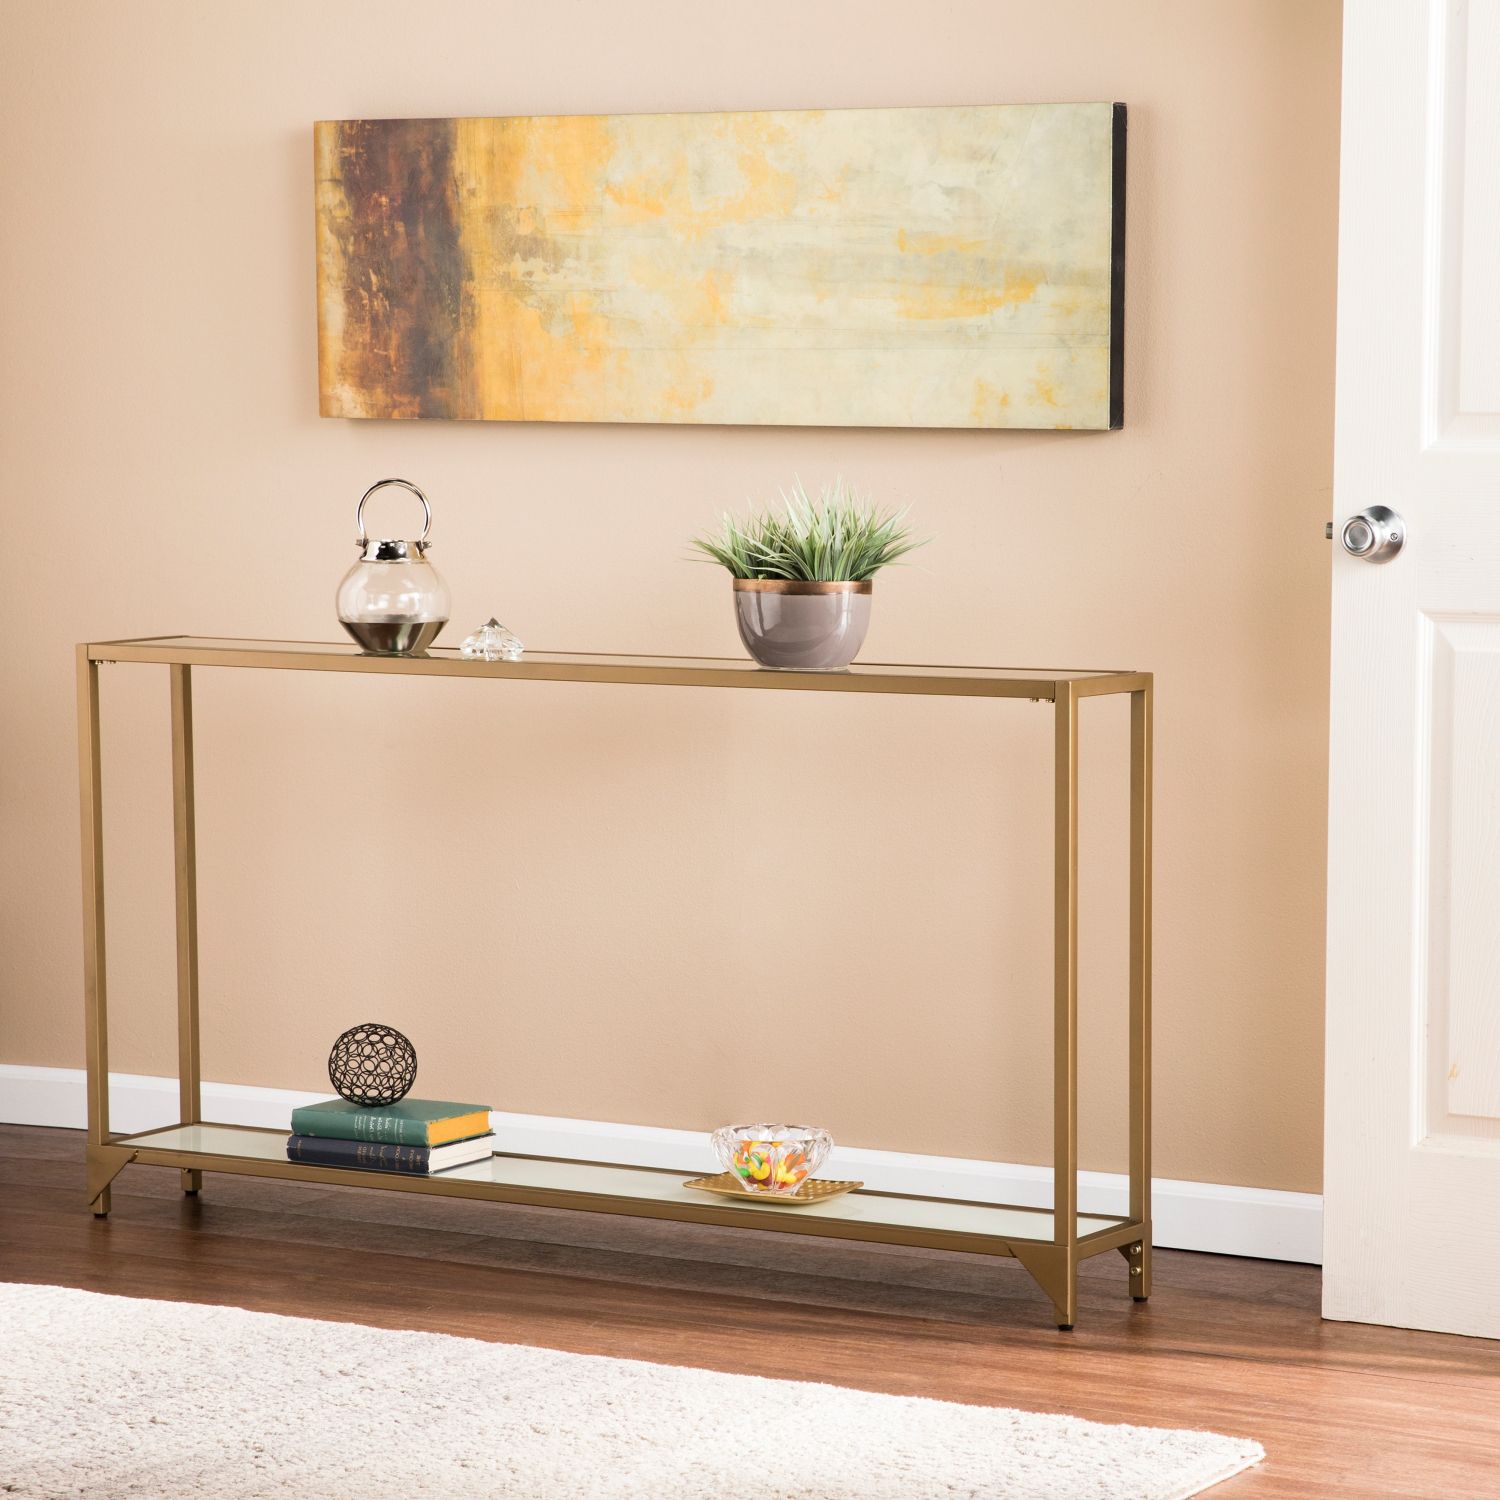 Newest Metallic Gold Console Tables With Regard To Narrow Thin Gold Console Table Metal & Glass W/shelf (View 8 of 10)